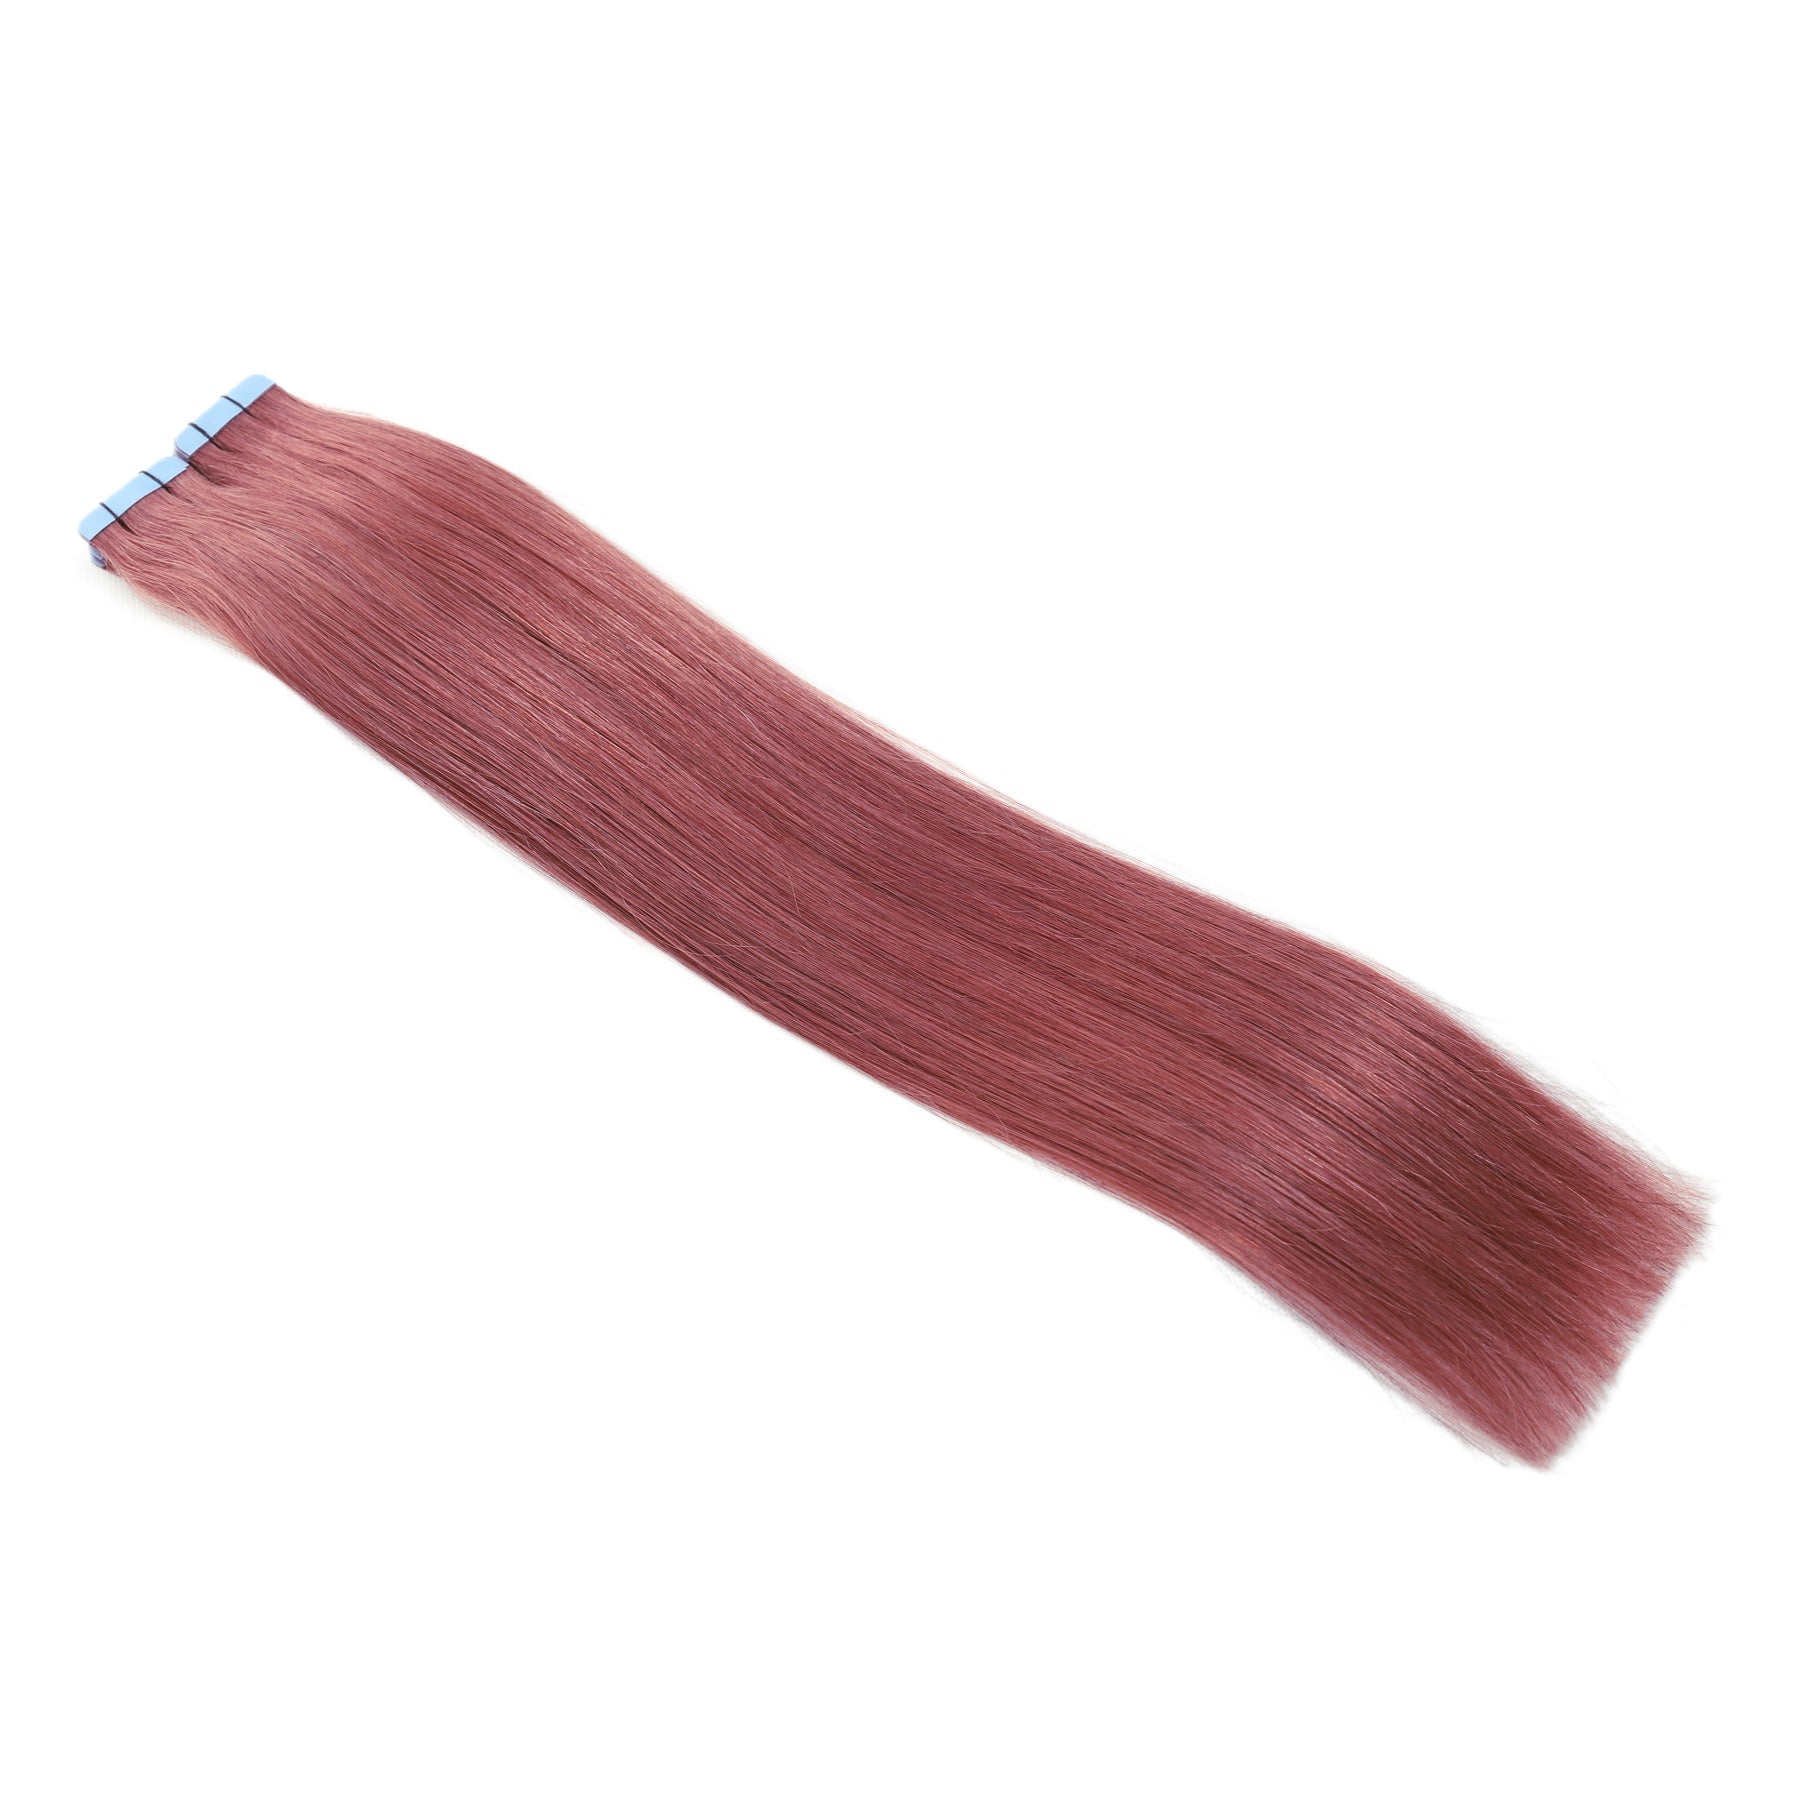 Tape Hair Extensions 23" #33 Natural Red